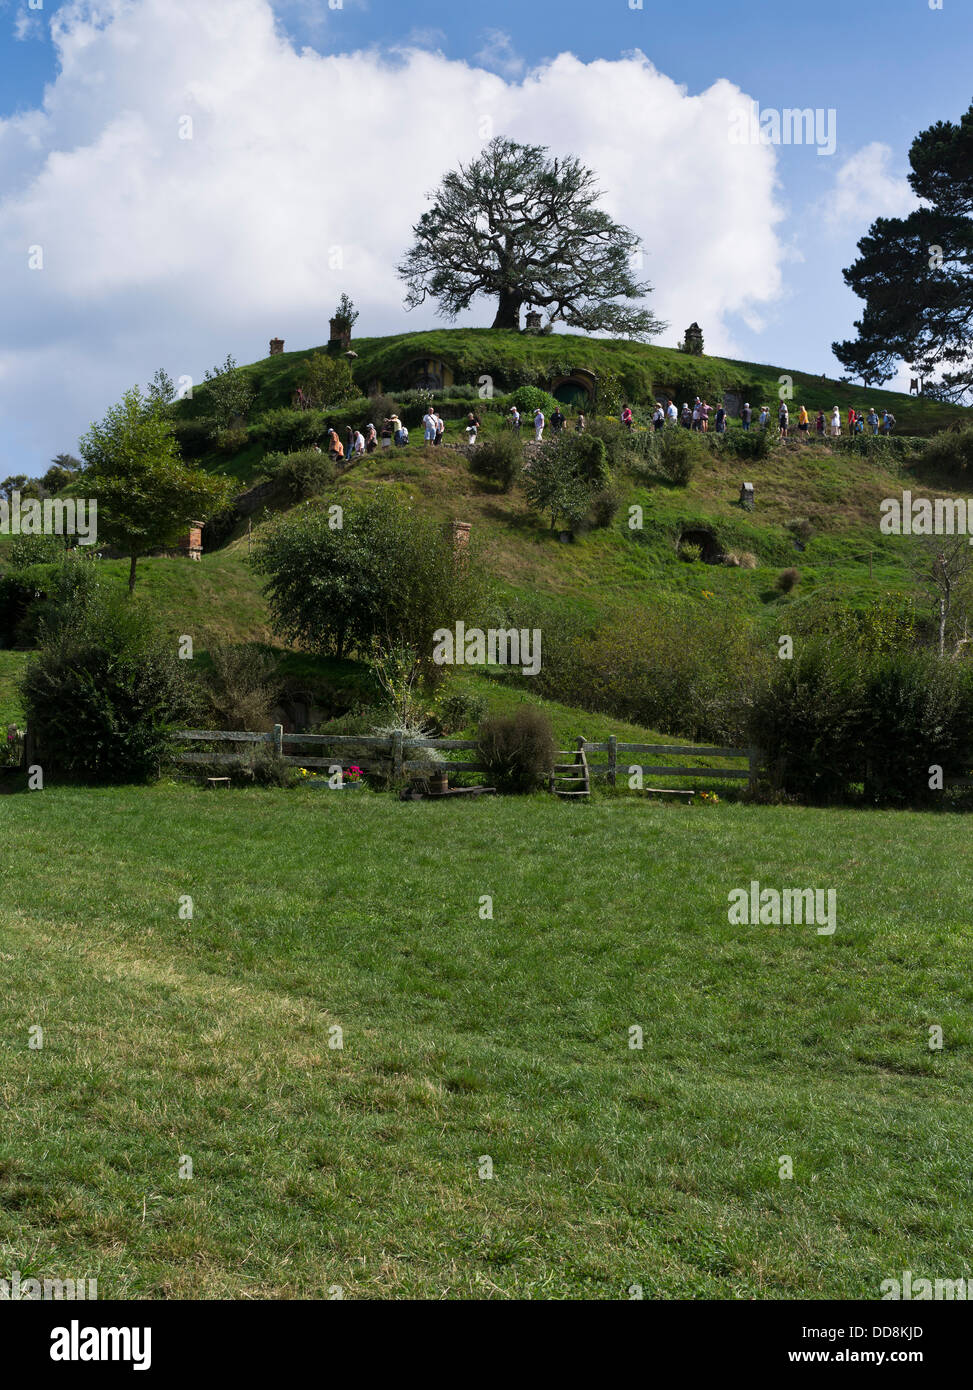 dh Lord of the Rings HOBBITON NEW ZEALAND Hobbits village tours film set movie site films people tourism hobbit tour Stock Photo